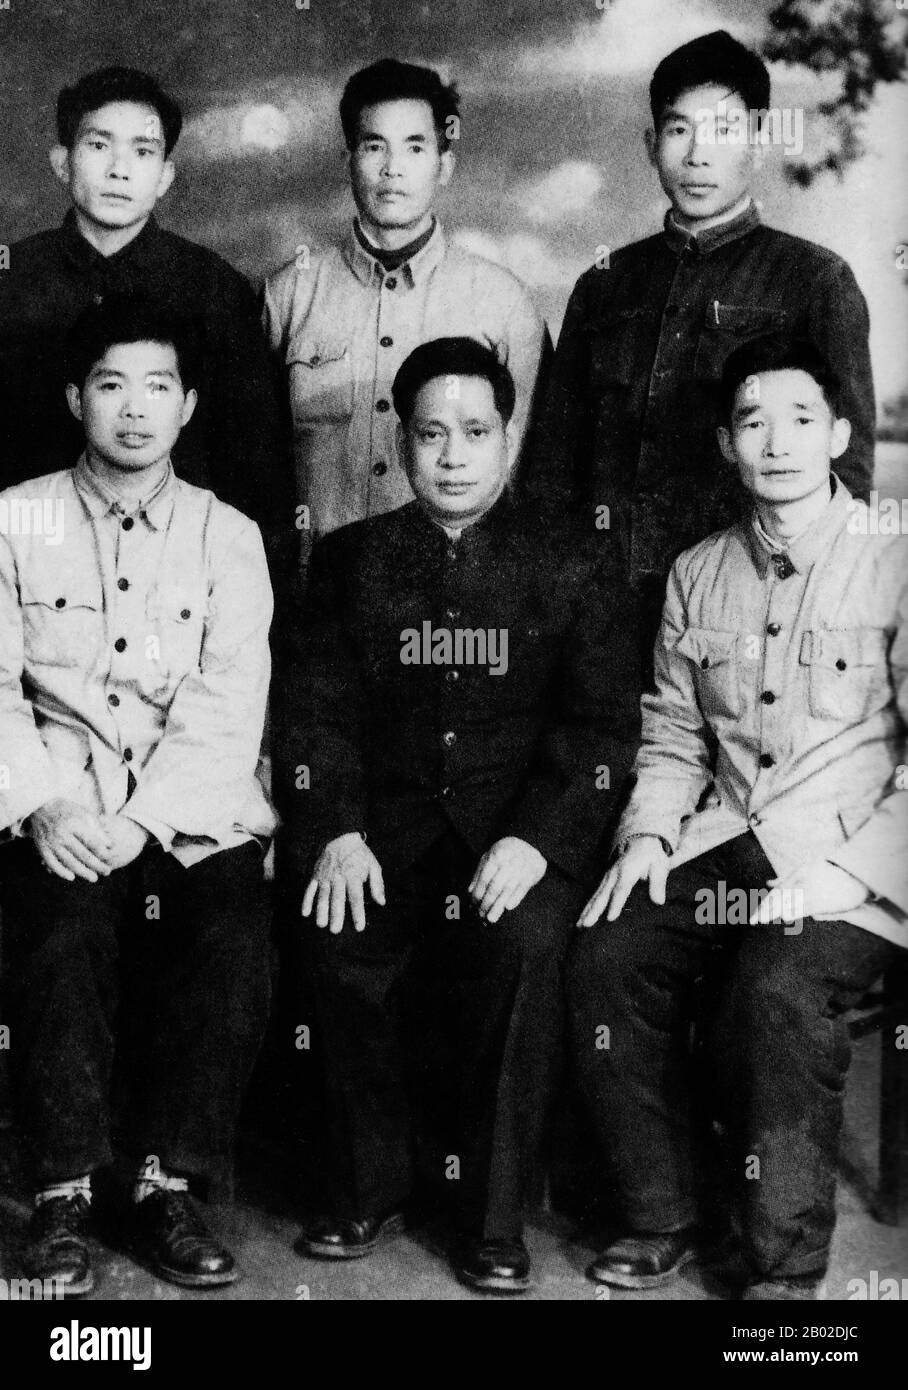 The 'Guizhou veterans' was the name given to the 200 - 300 Kachins who spent the years from 1950 to 1968 in Guizhou Province. They were military commanders.  The Communist Party of Burma (Burmese: ဗမာပြည်ကွန်မြူနစ်ပါတီ; CPB) is the oldest existing political party in Burma. The party is unrecognised by the Burmese authorities, rendering it illegal; so it operates in a clandestine manner, often associating with insurgent armies along the border of People's Republic of China. It is often referred to as the Burma Communist Party (BCP) by both the Burmese government and the foreign media. Stock Photo